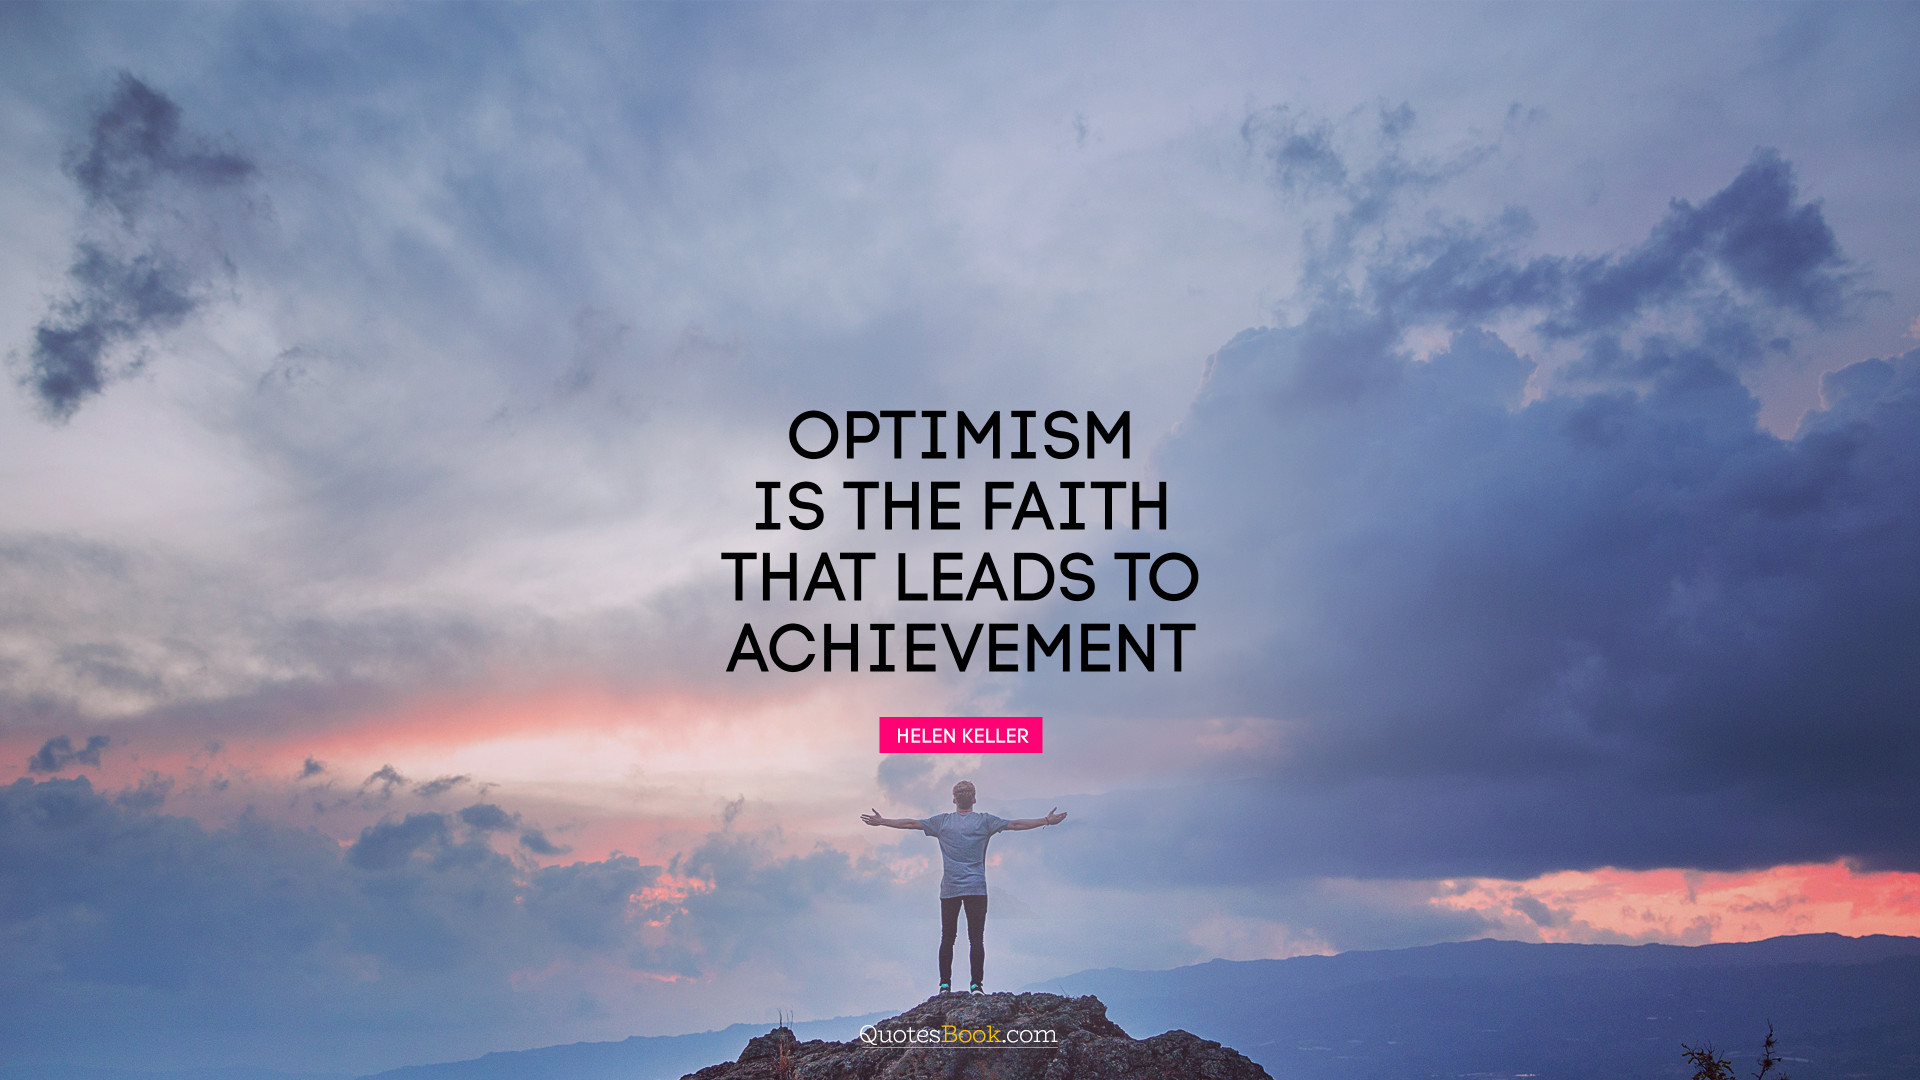 Optimism is the faith that leads to achievement. - Quote by Helen